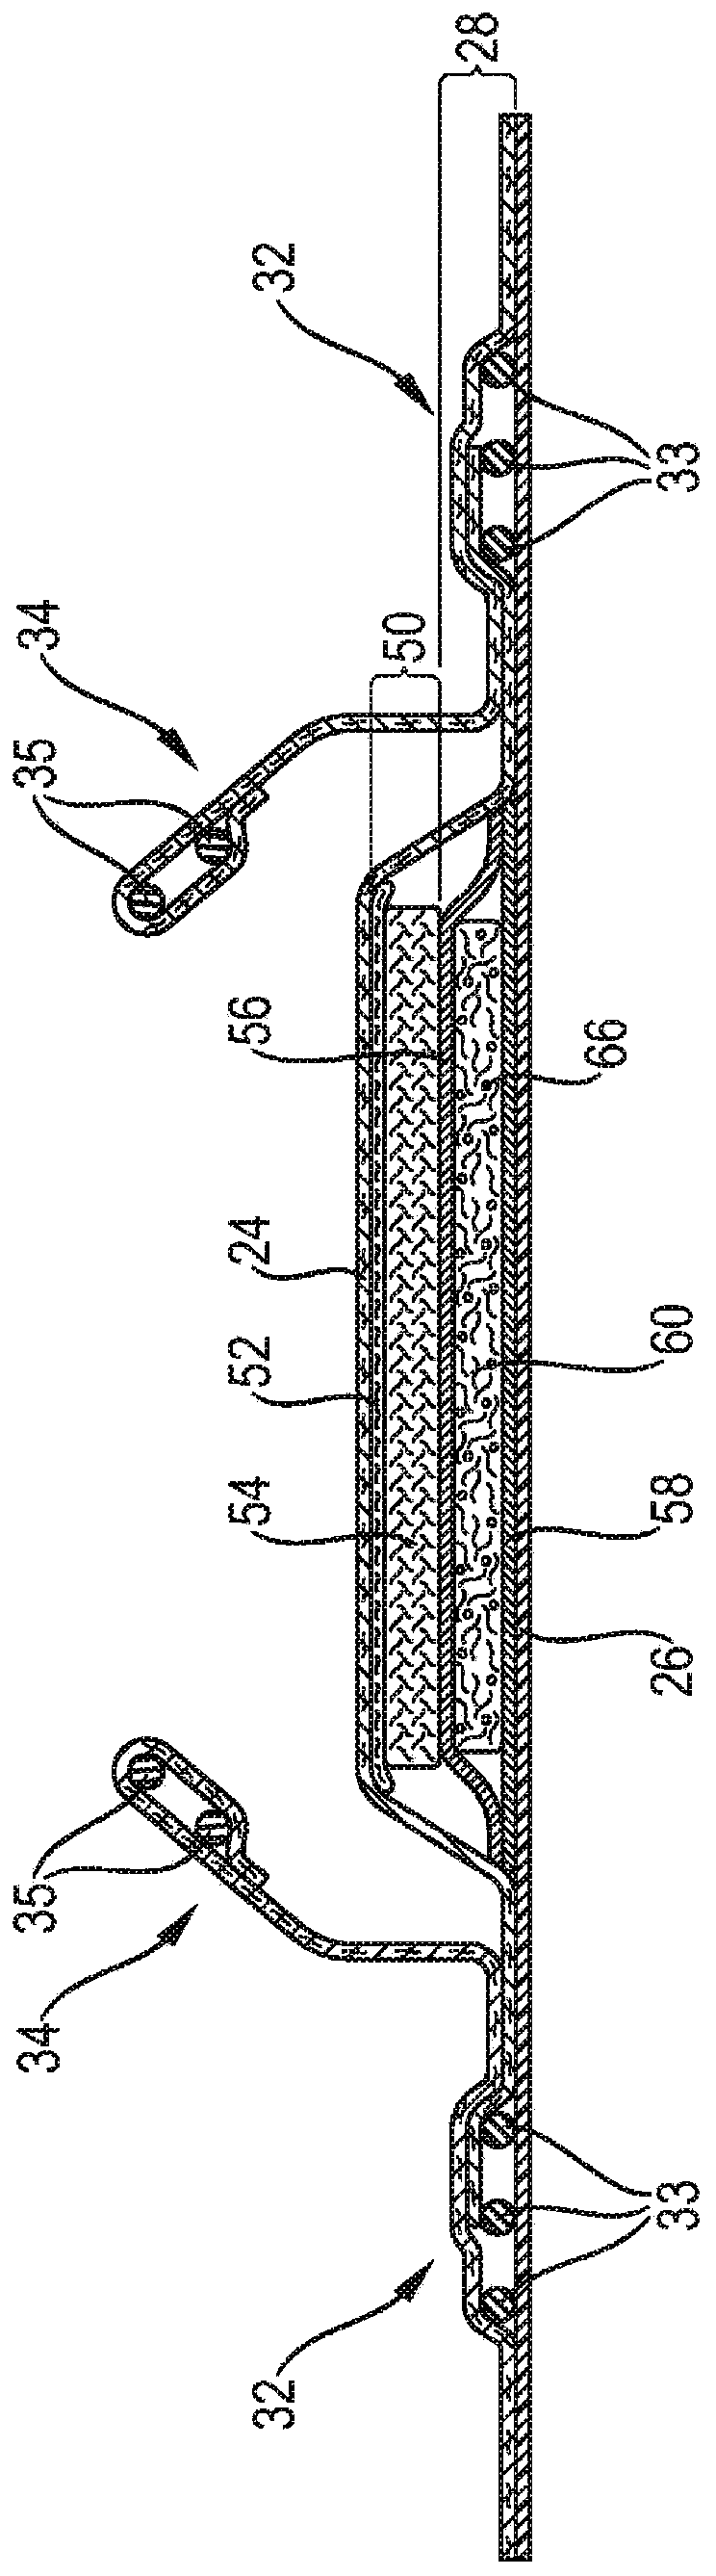 Agglomerated superabsorbent polymer particles comprising clay platelets with edge modification and/or surface modification